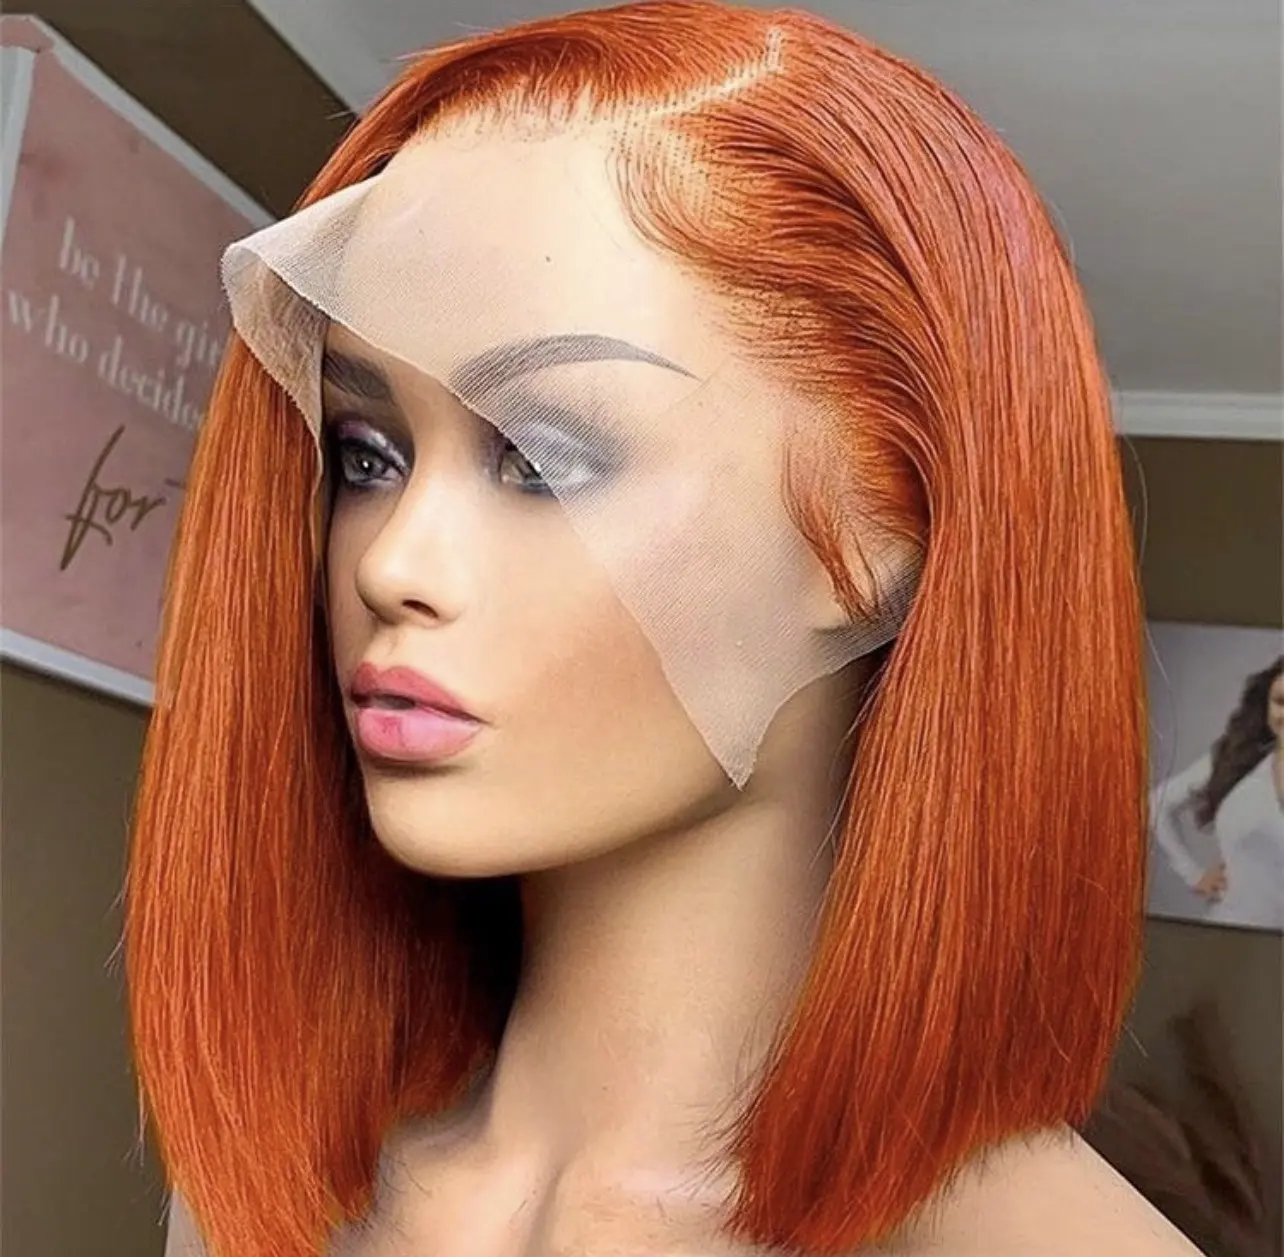 cheap wholesale wigs hair wigs made from 100% real hair with quality assurance suitable for indians